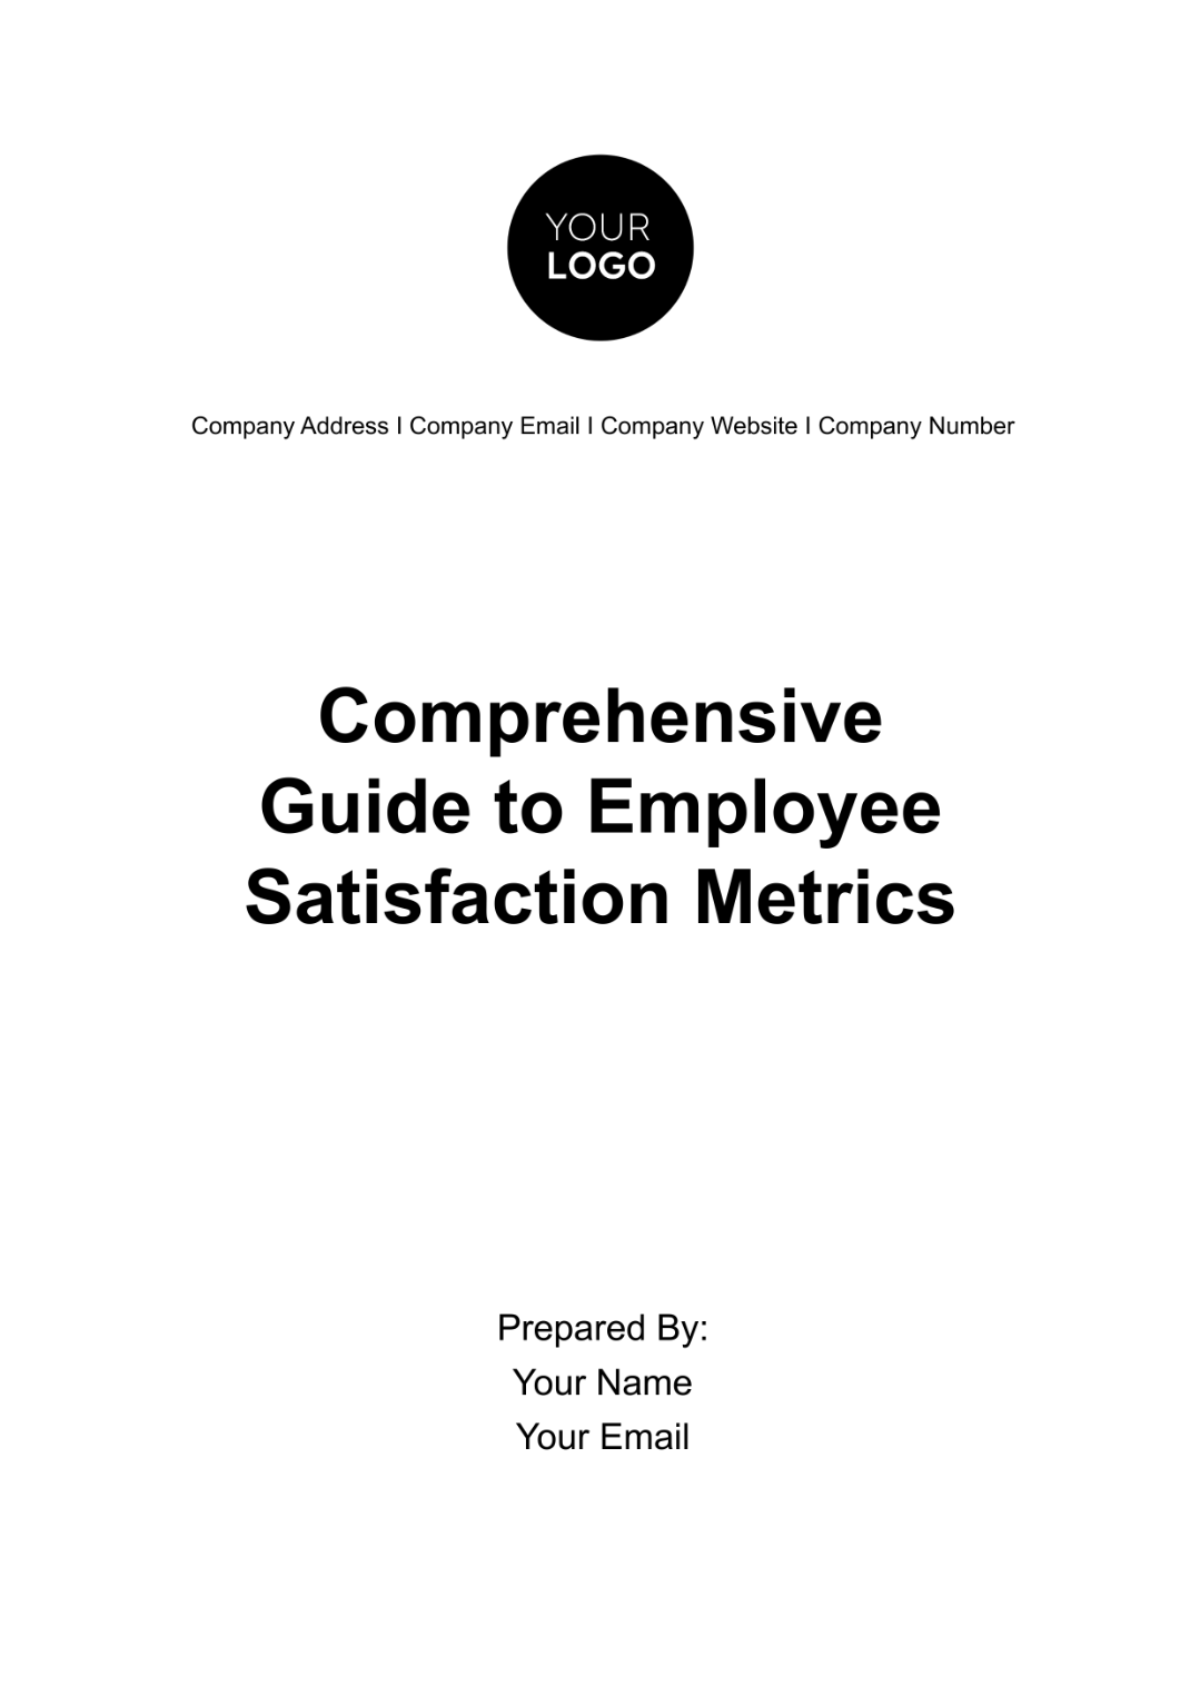 Free Comprehensive Guide to Employee Satisfaction Metrics HR Template